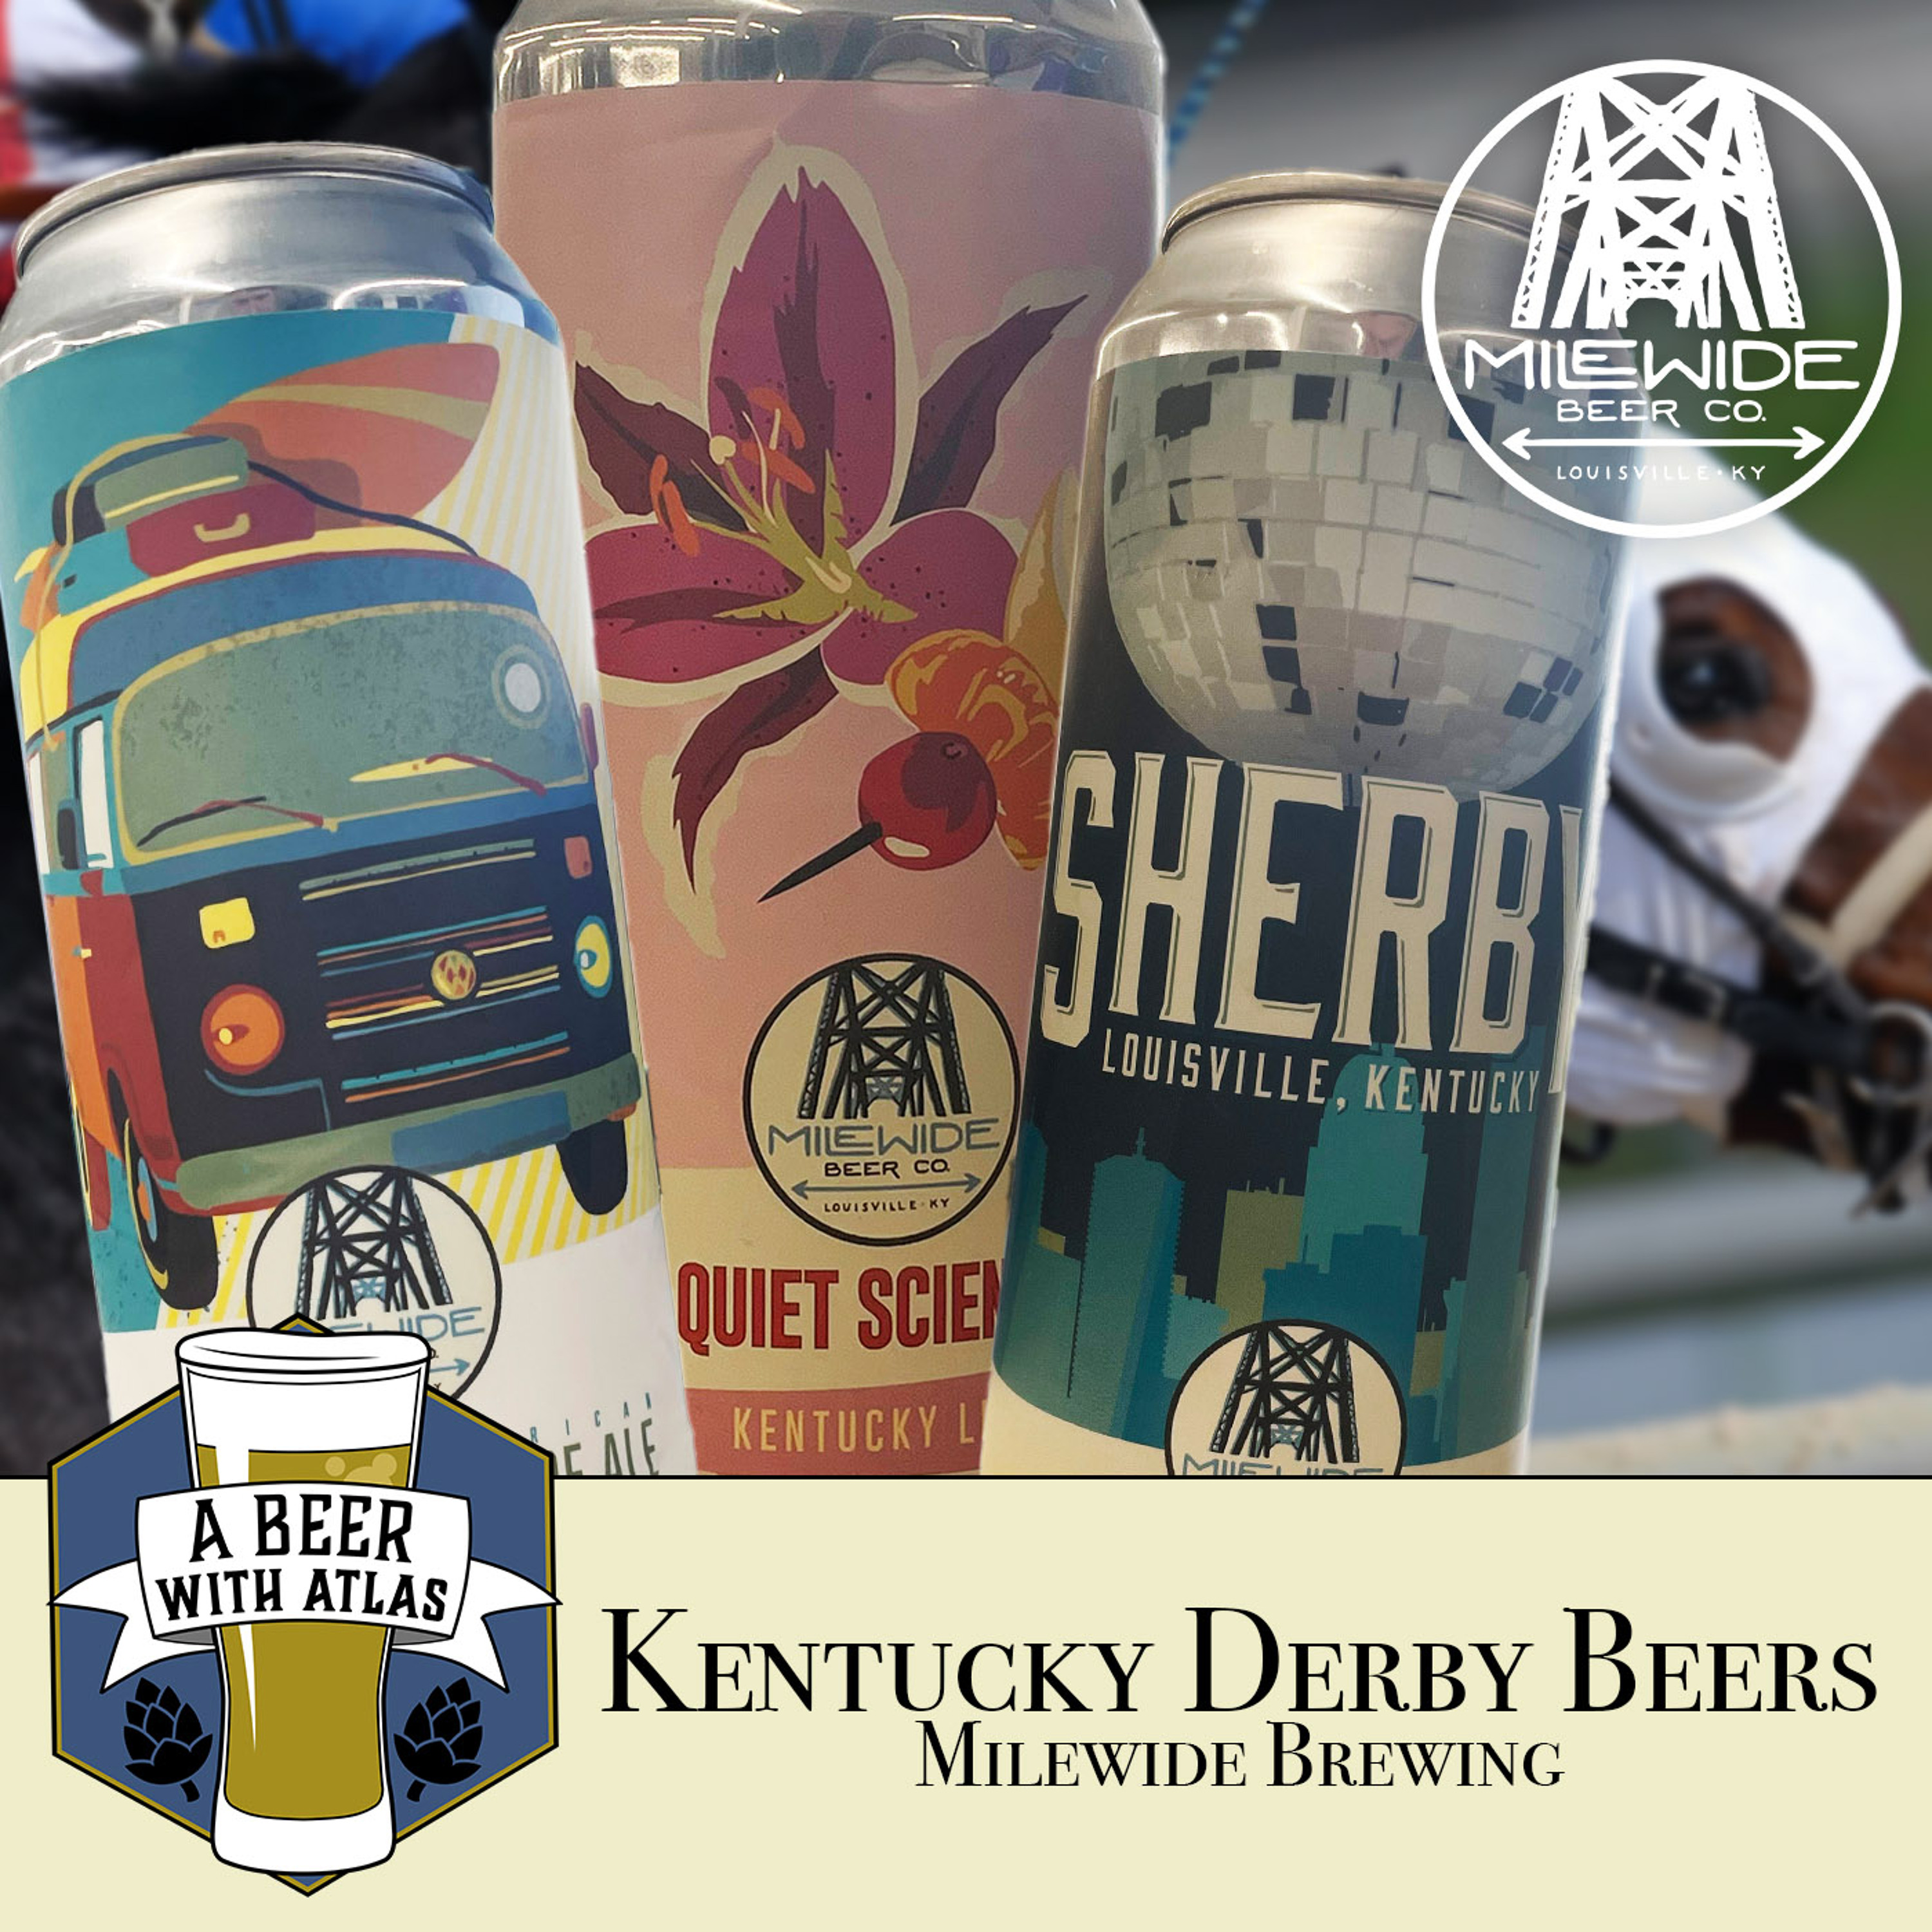 Milewide Brewing Company | Kentucky Derby Beers - A Beer with Atlas 205